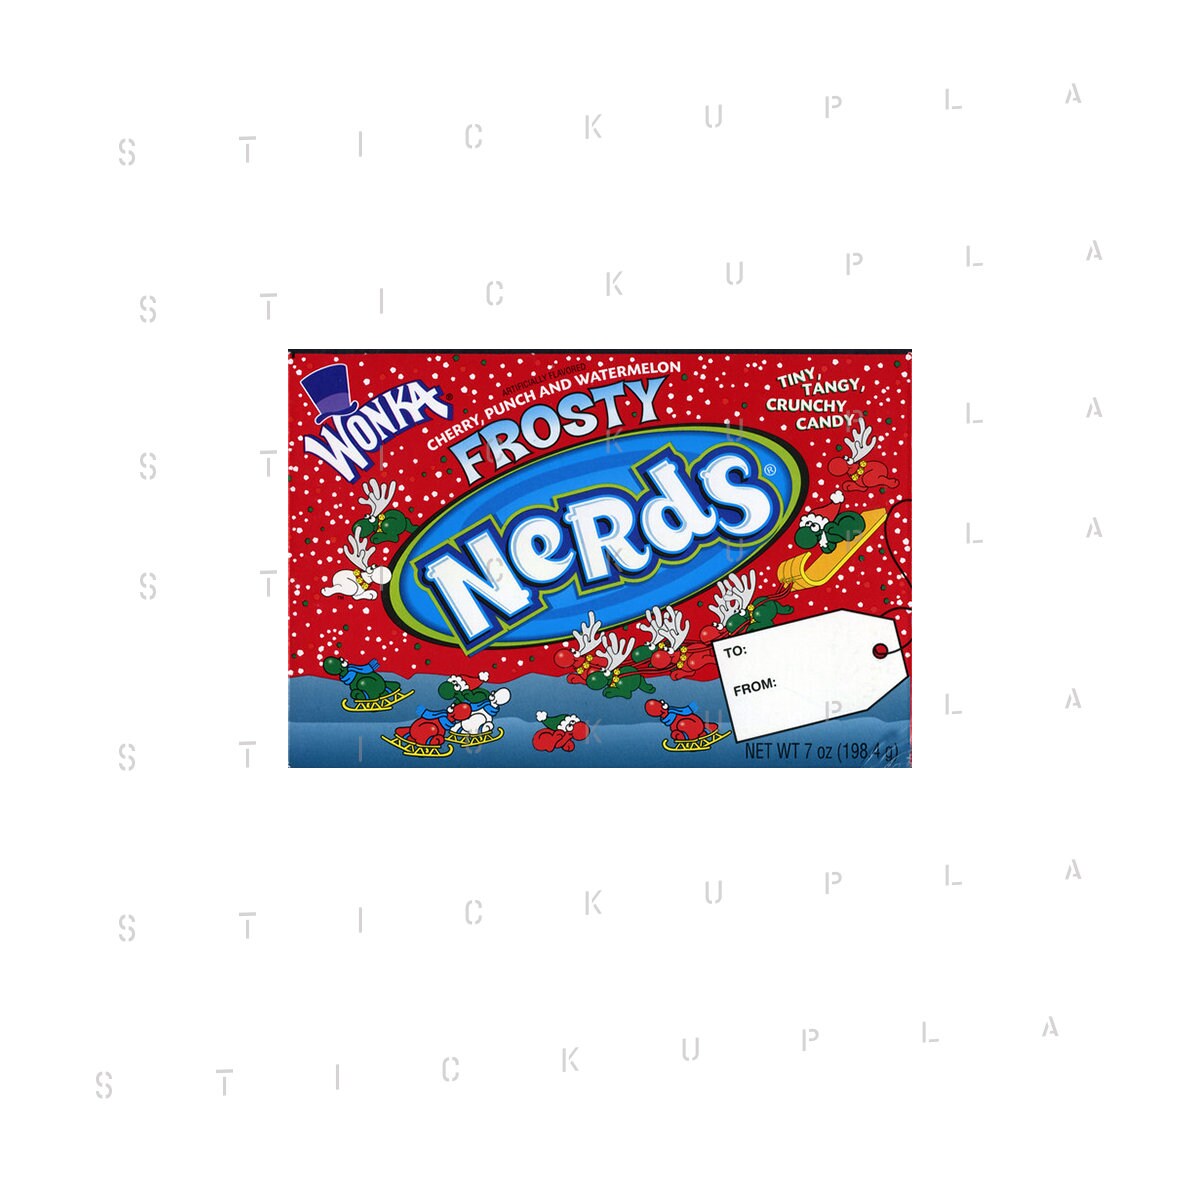 Nerds Frosty Theater Box, Watermelon, Cherry, & Punch, 5 ounce (Pack of 12)  - Perfect for Stocking Stuffers, Holiday Gifting and Decorating